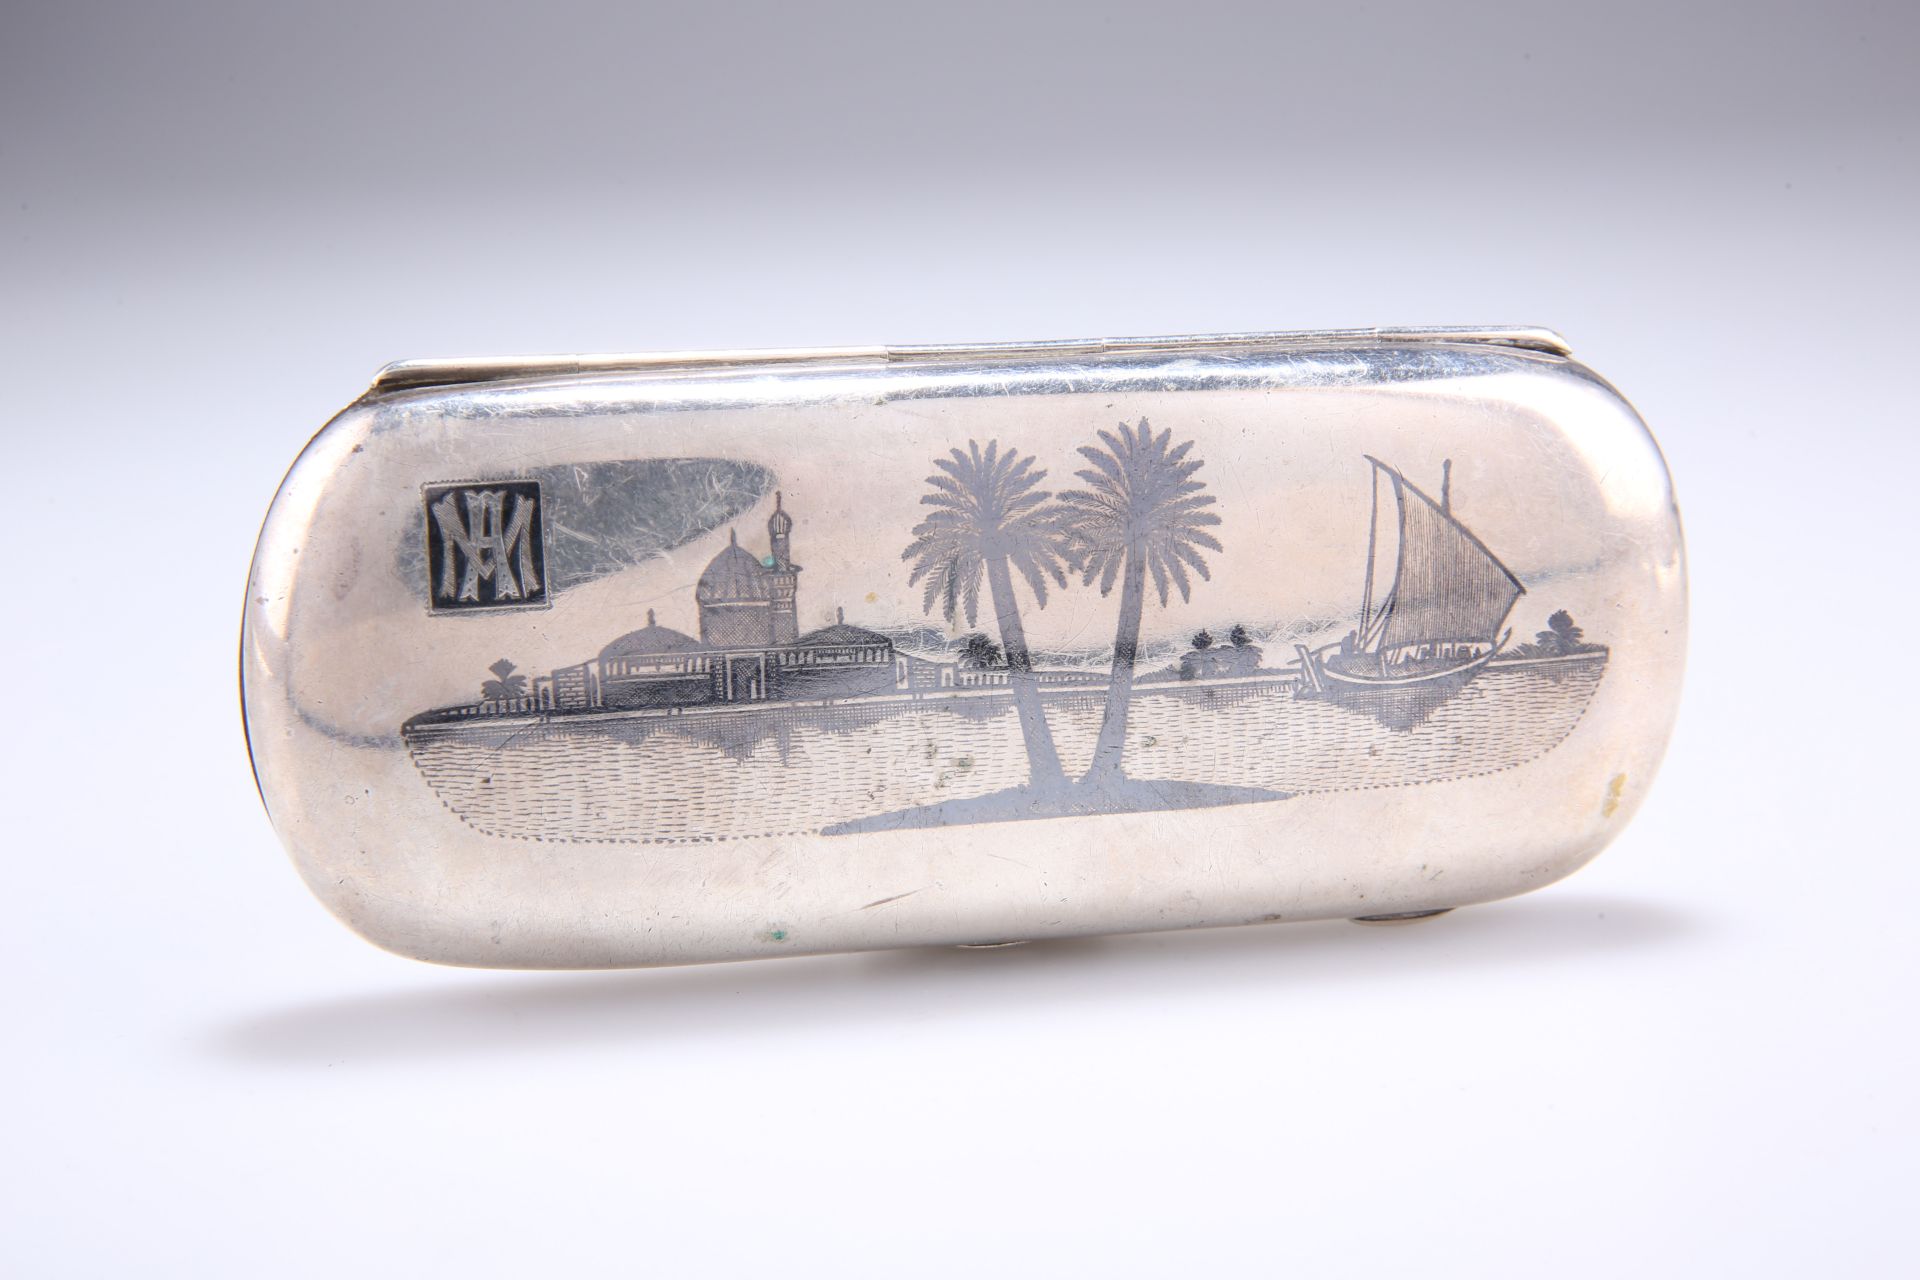 A PERSIAN SILVER SPECTACLE CASE, EARLY 20TH CENTURY